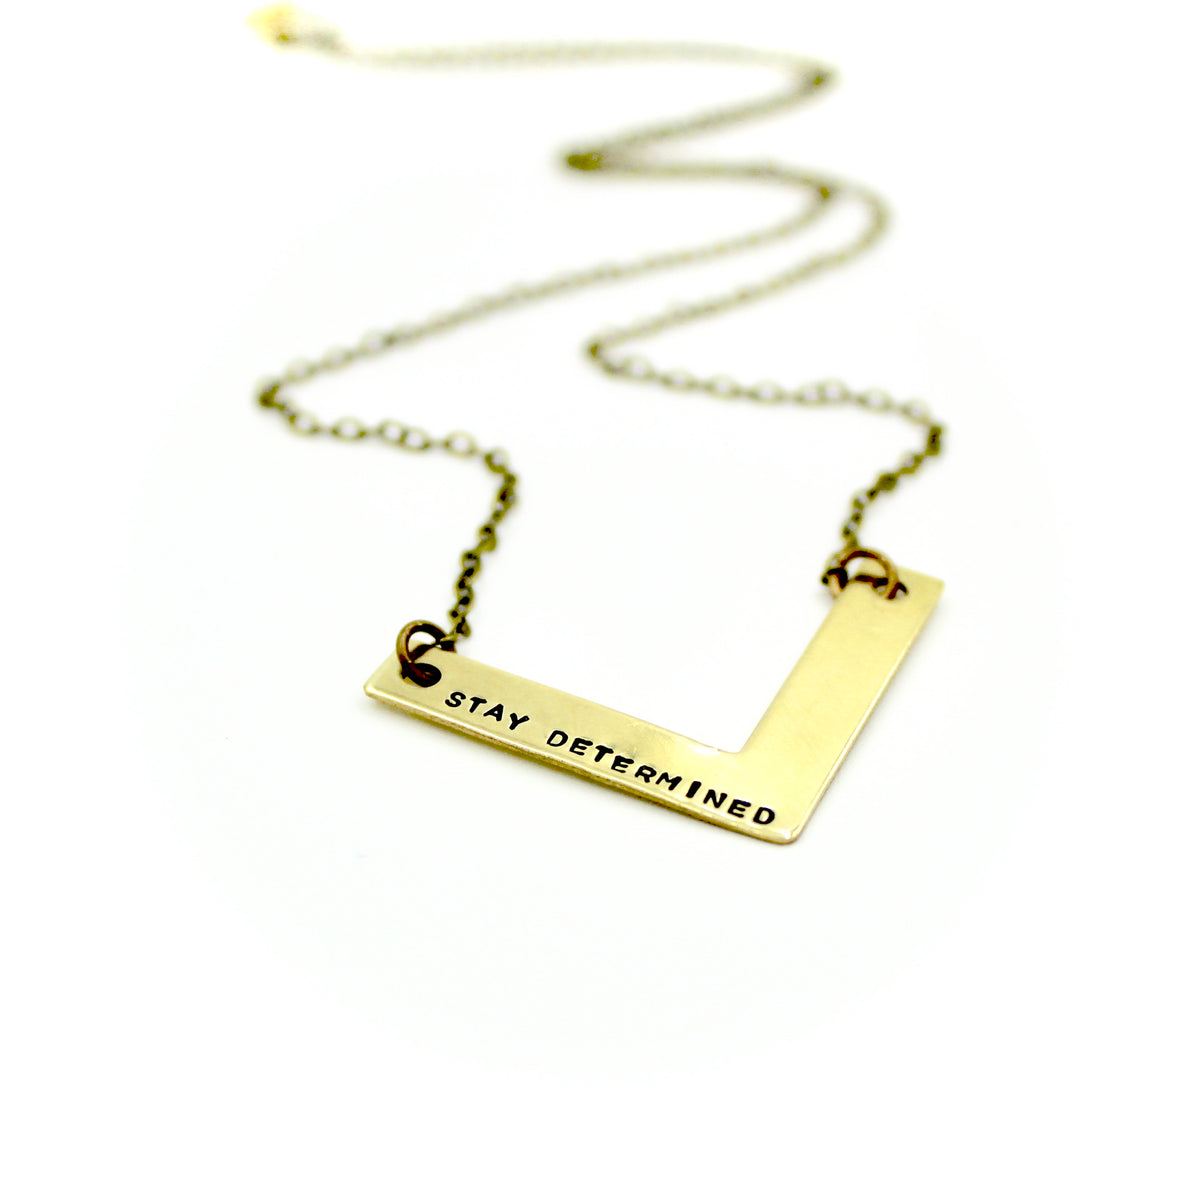 Stay Determined Necklace